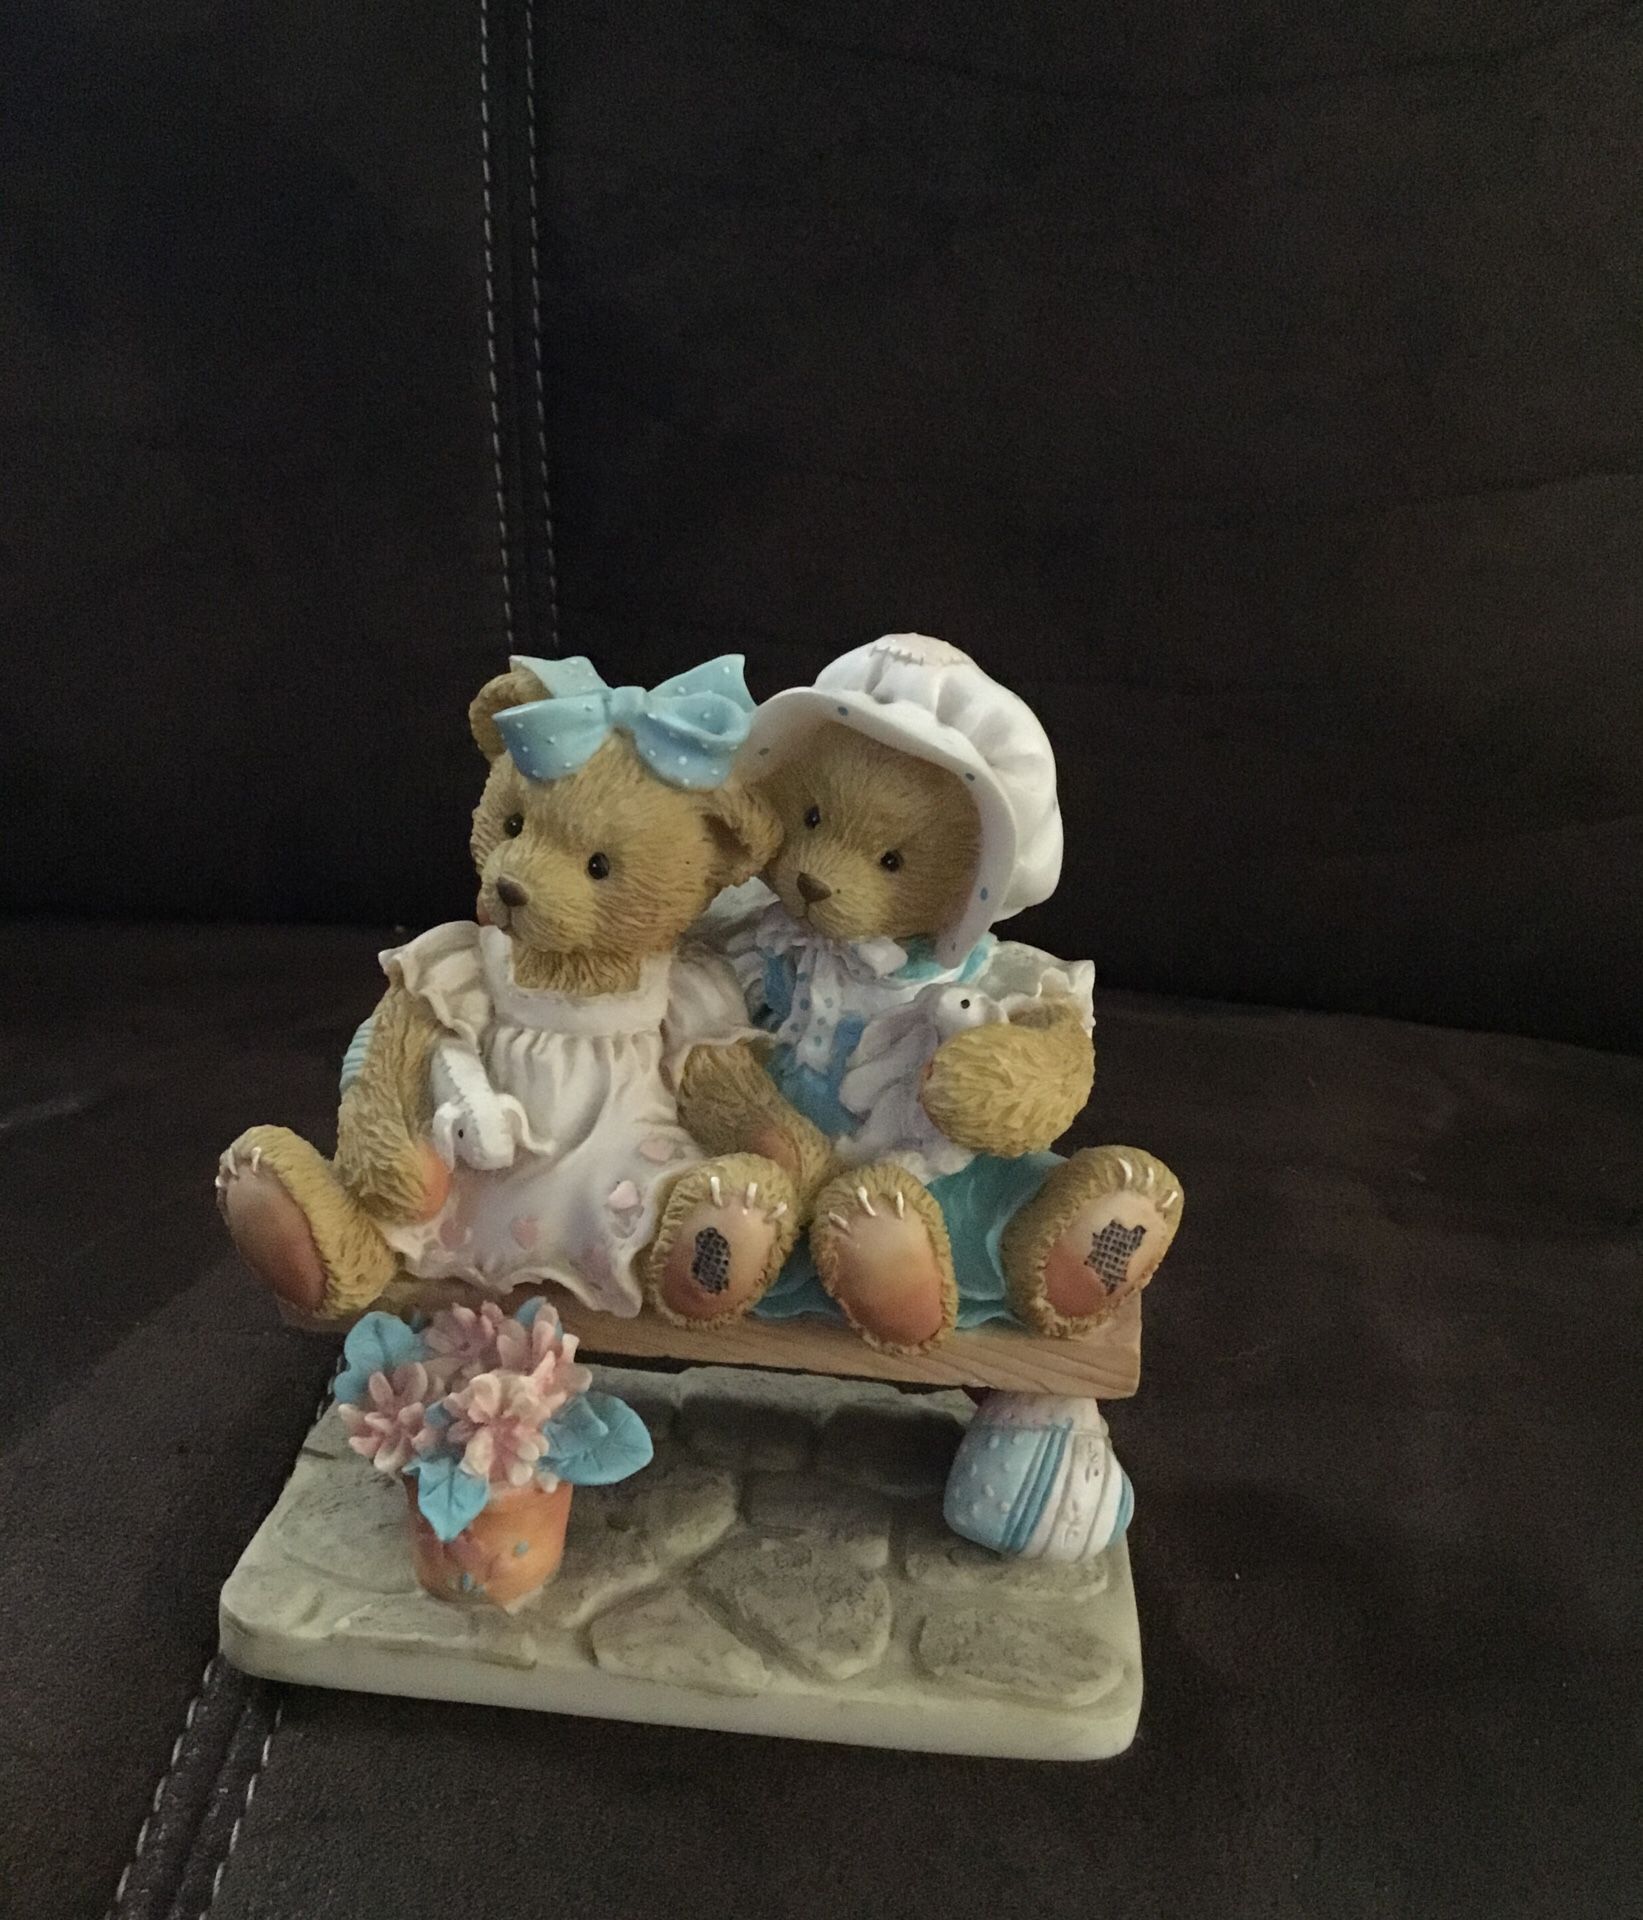 Cherished Teddies Tracie and Nicole “Side by Side with Friends”